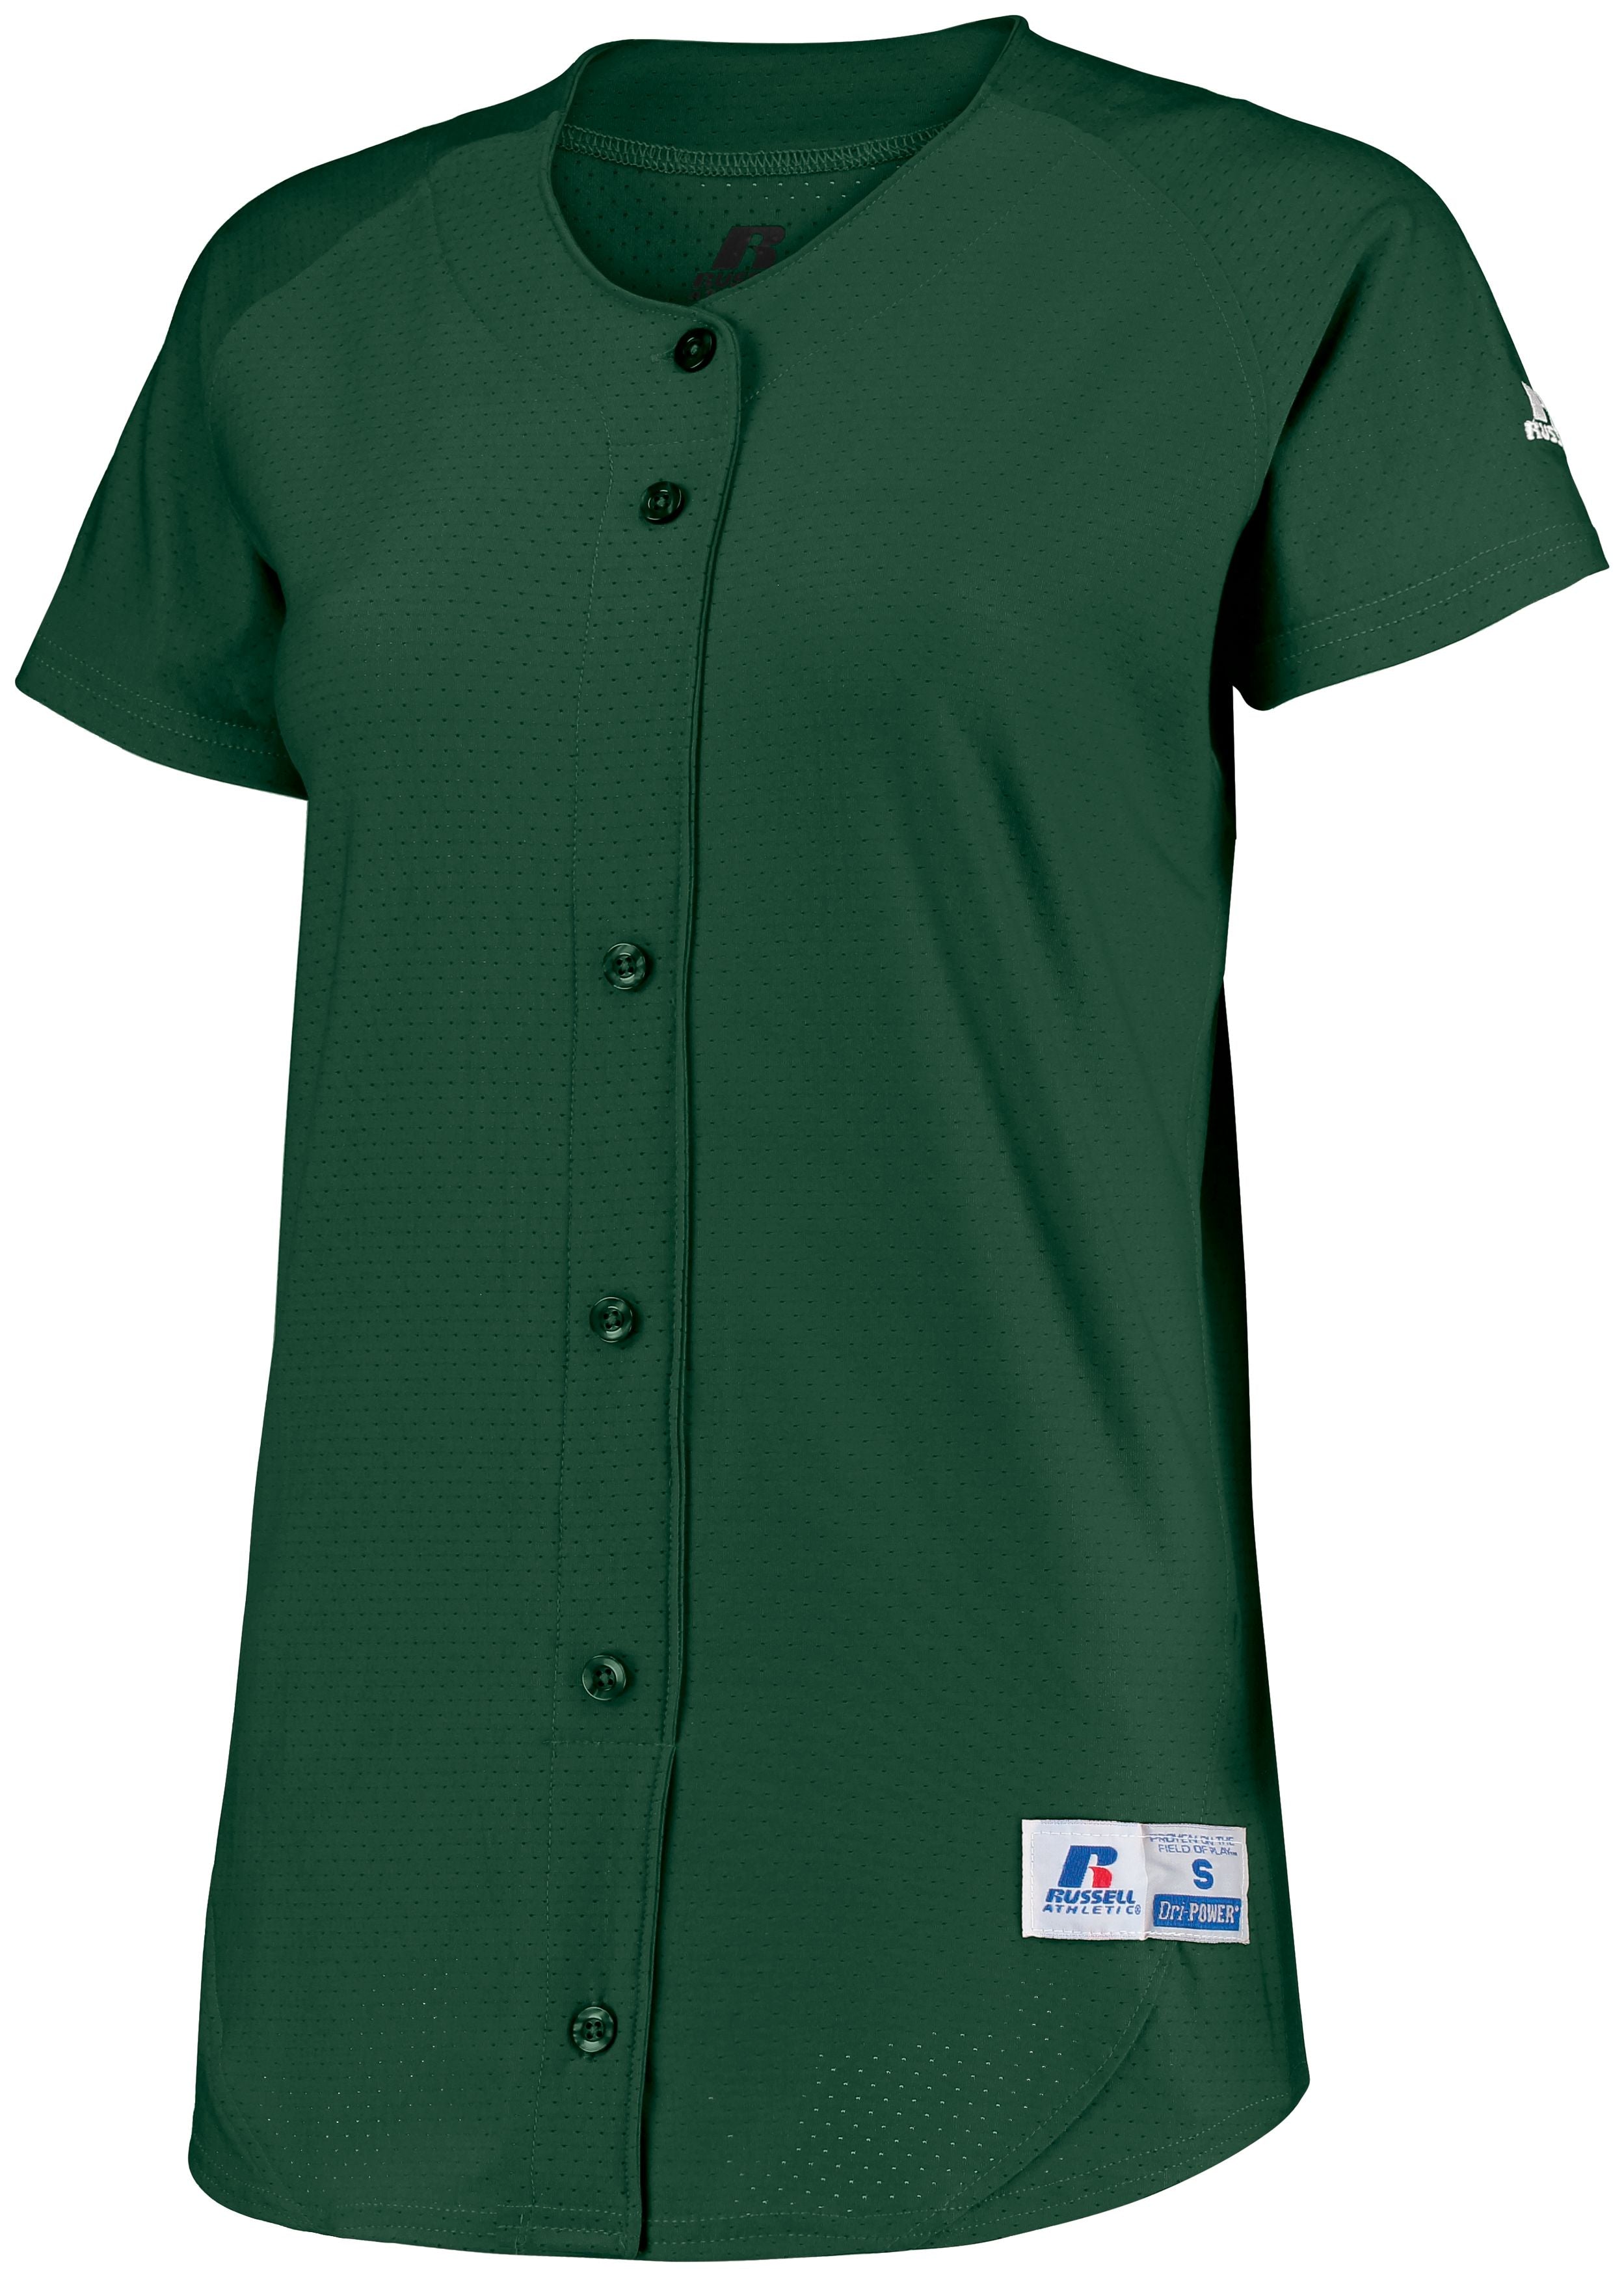 Russell Athletic Ladies Stretch Faux Button Jersey in Dark Green  -Part of the Ladies, Ladies-Jersey, Softball, Russell-Athletic-Products, Shirts product lines at KanaleyCreations.com